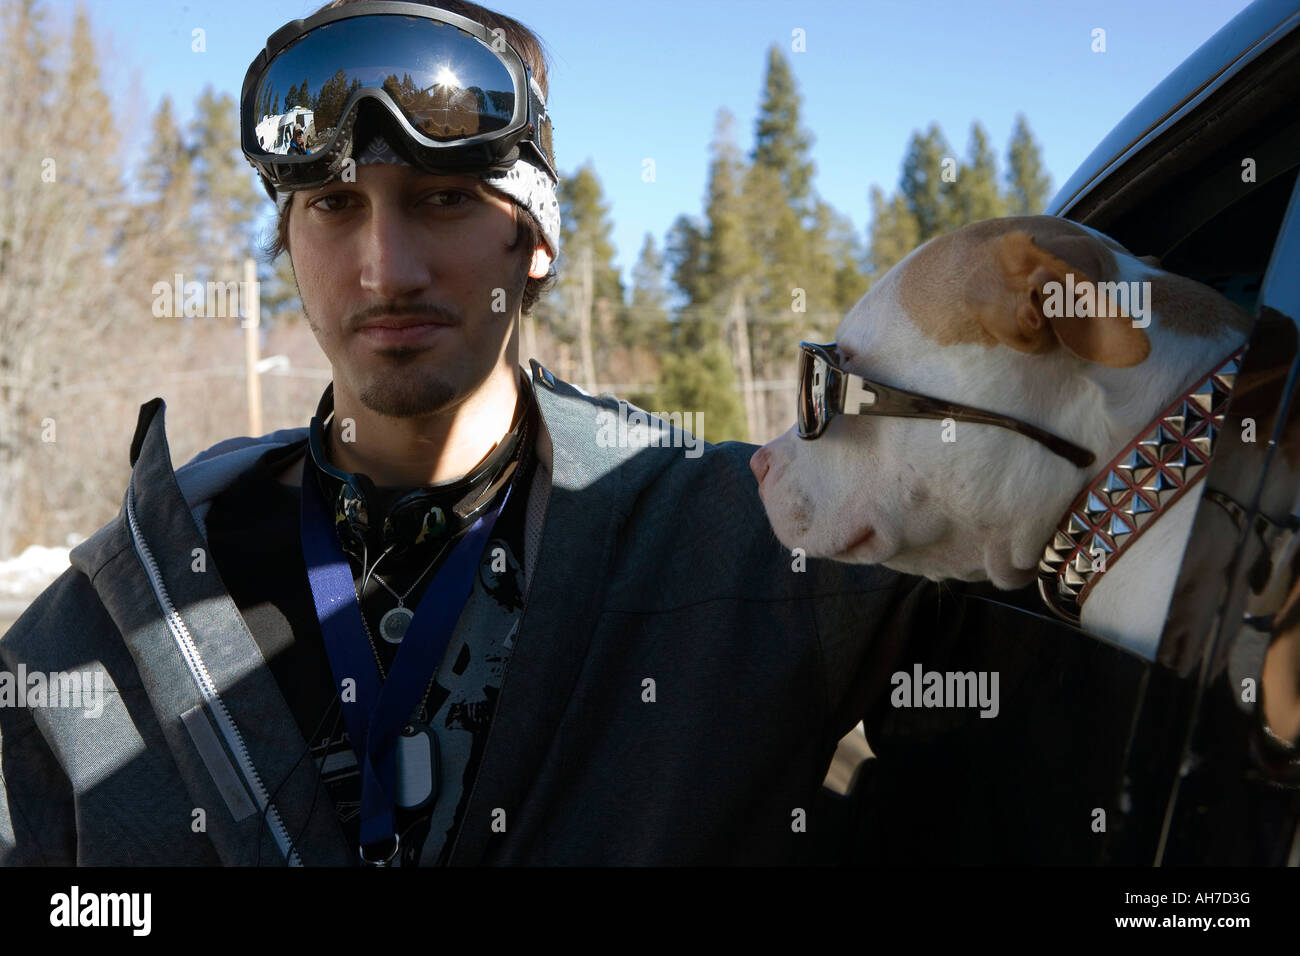 Young man beside a dog wearing sunglasses Stock Photo